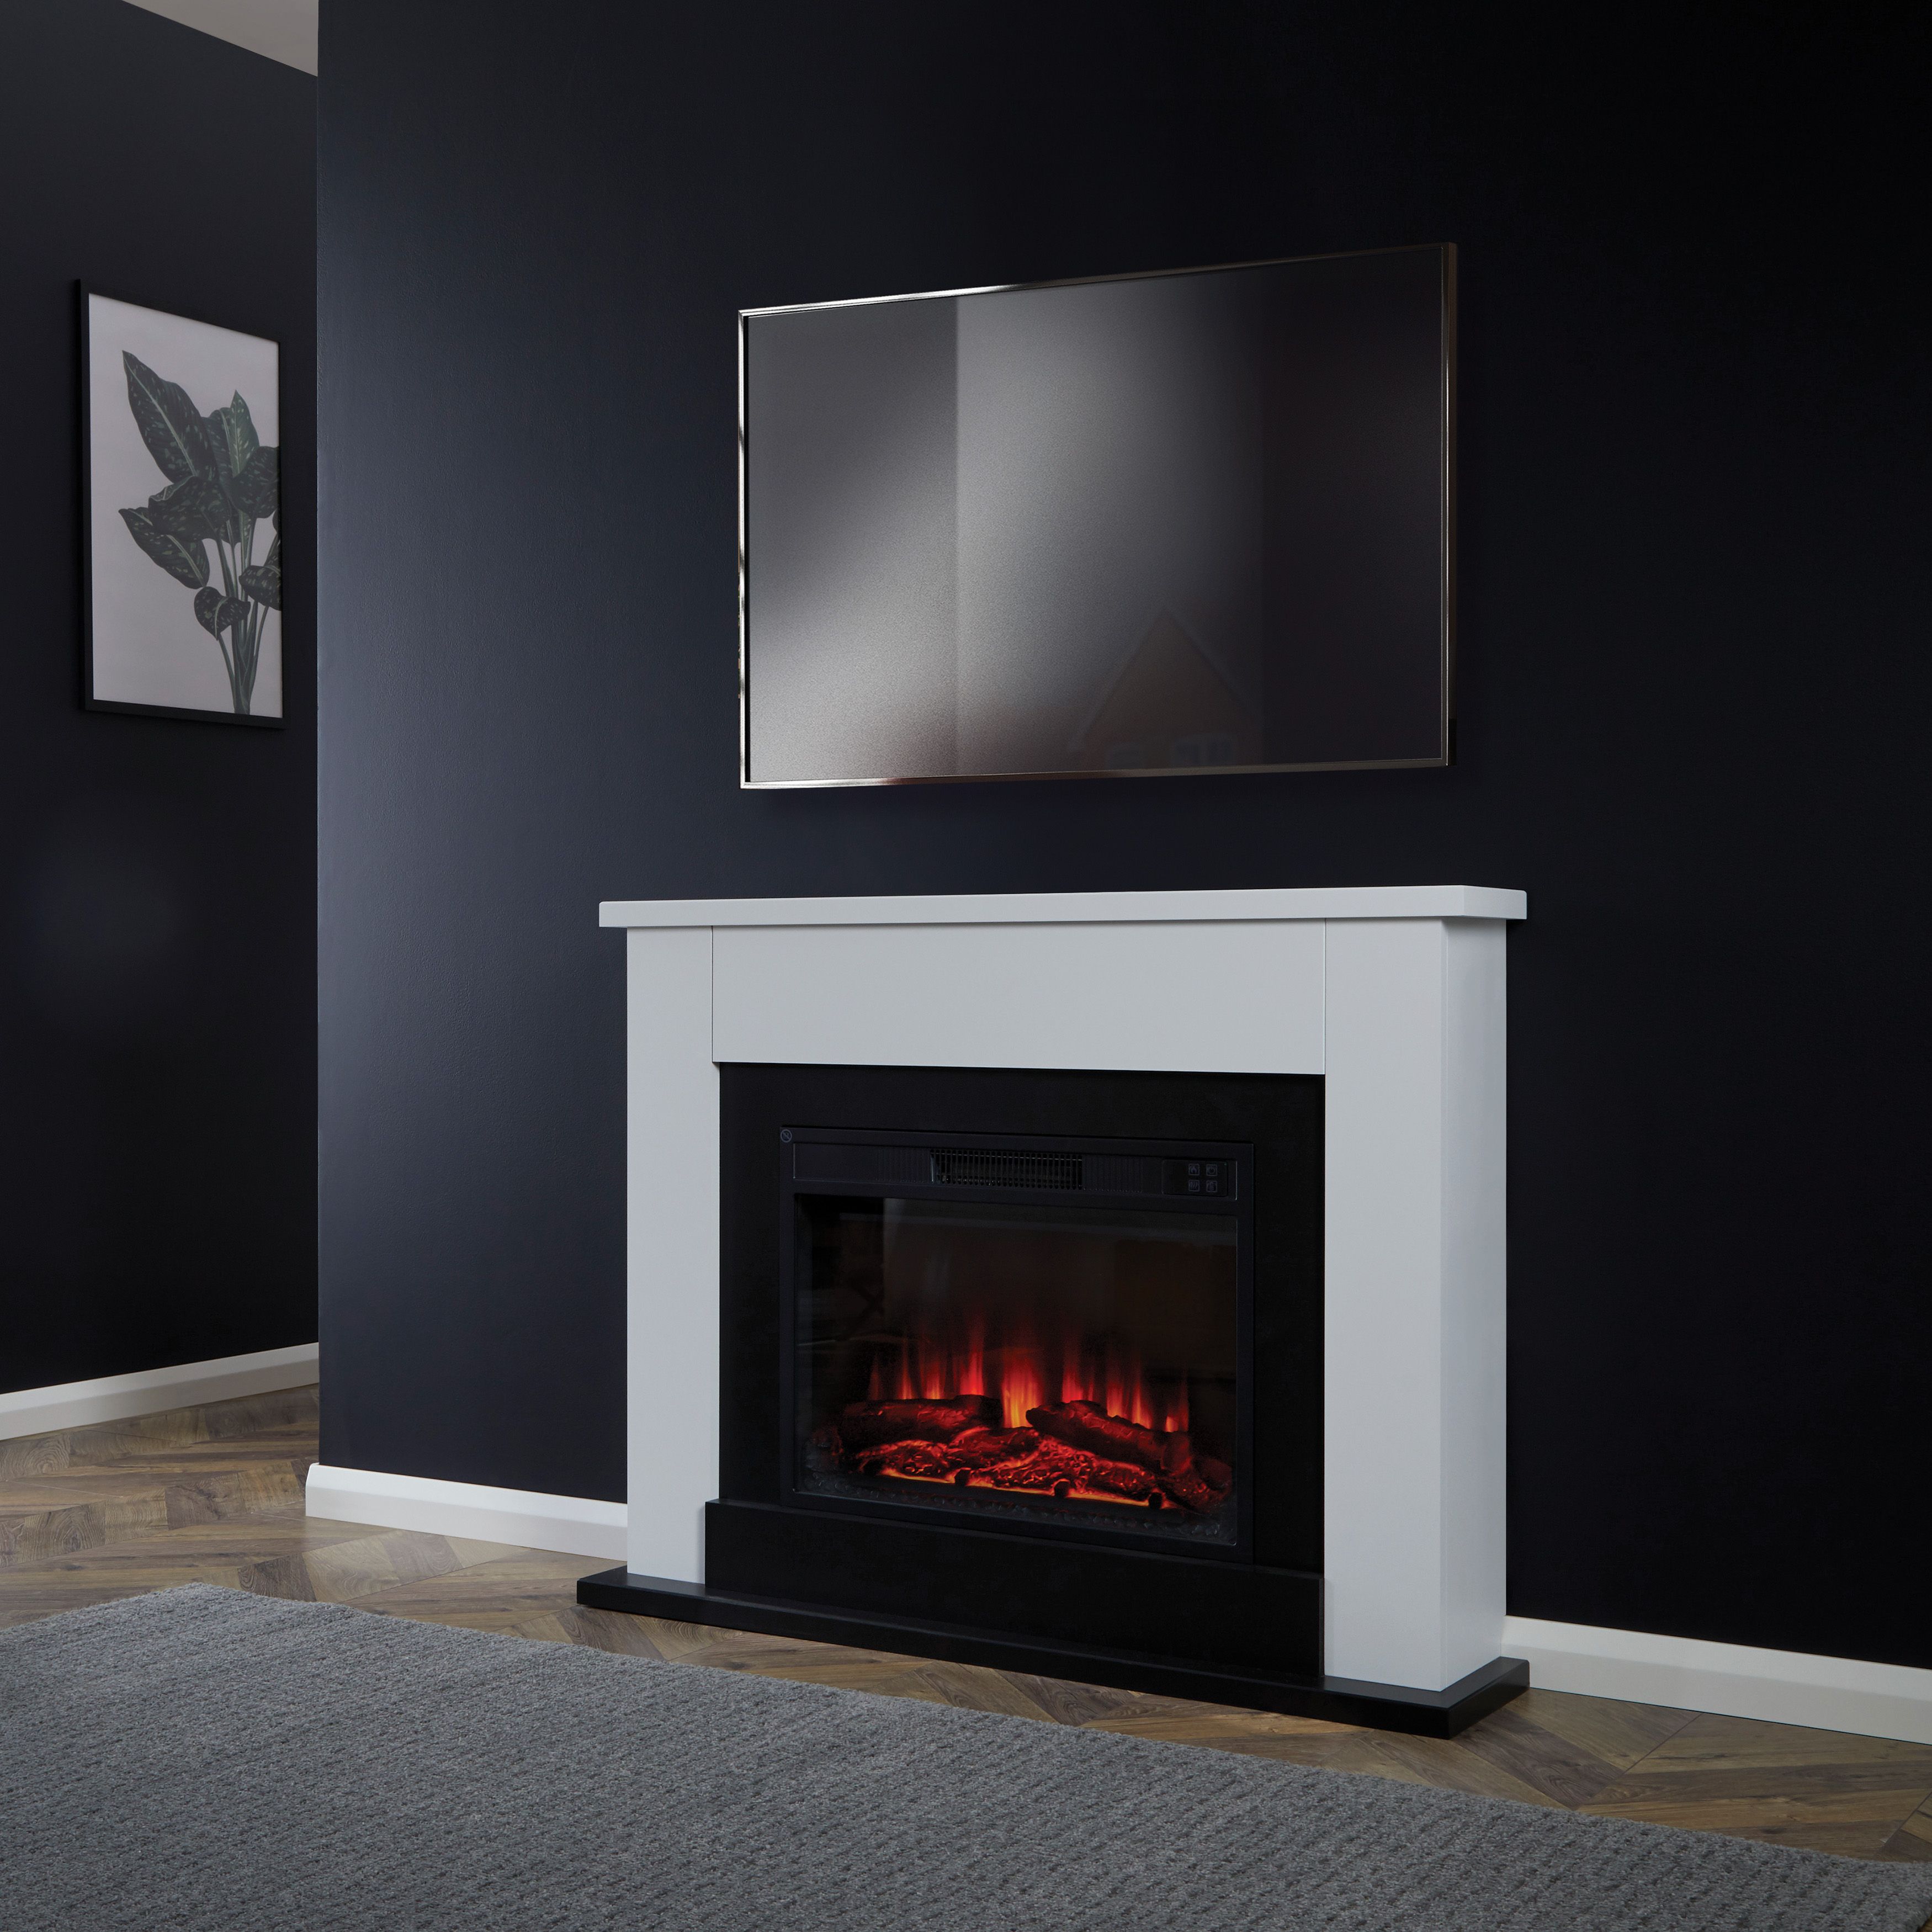 Suncrest Ryedale Black & white Textured stone effect MDF & stainless steel Freestanding Electric fire suite